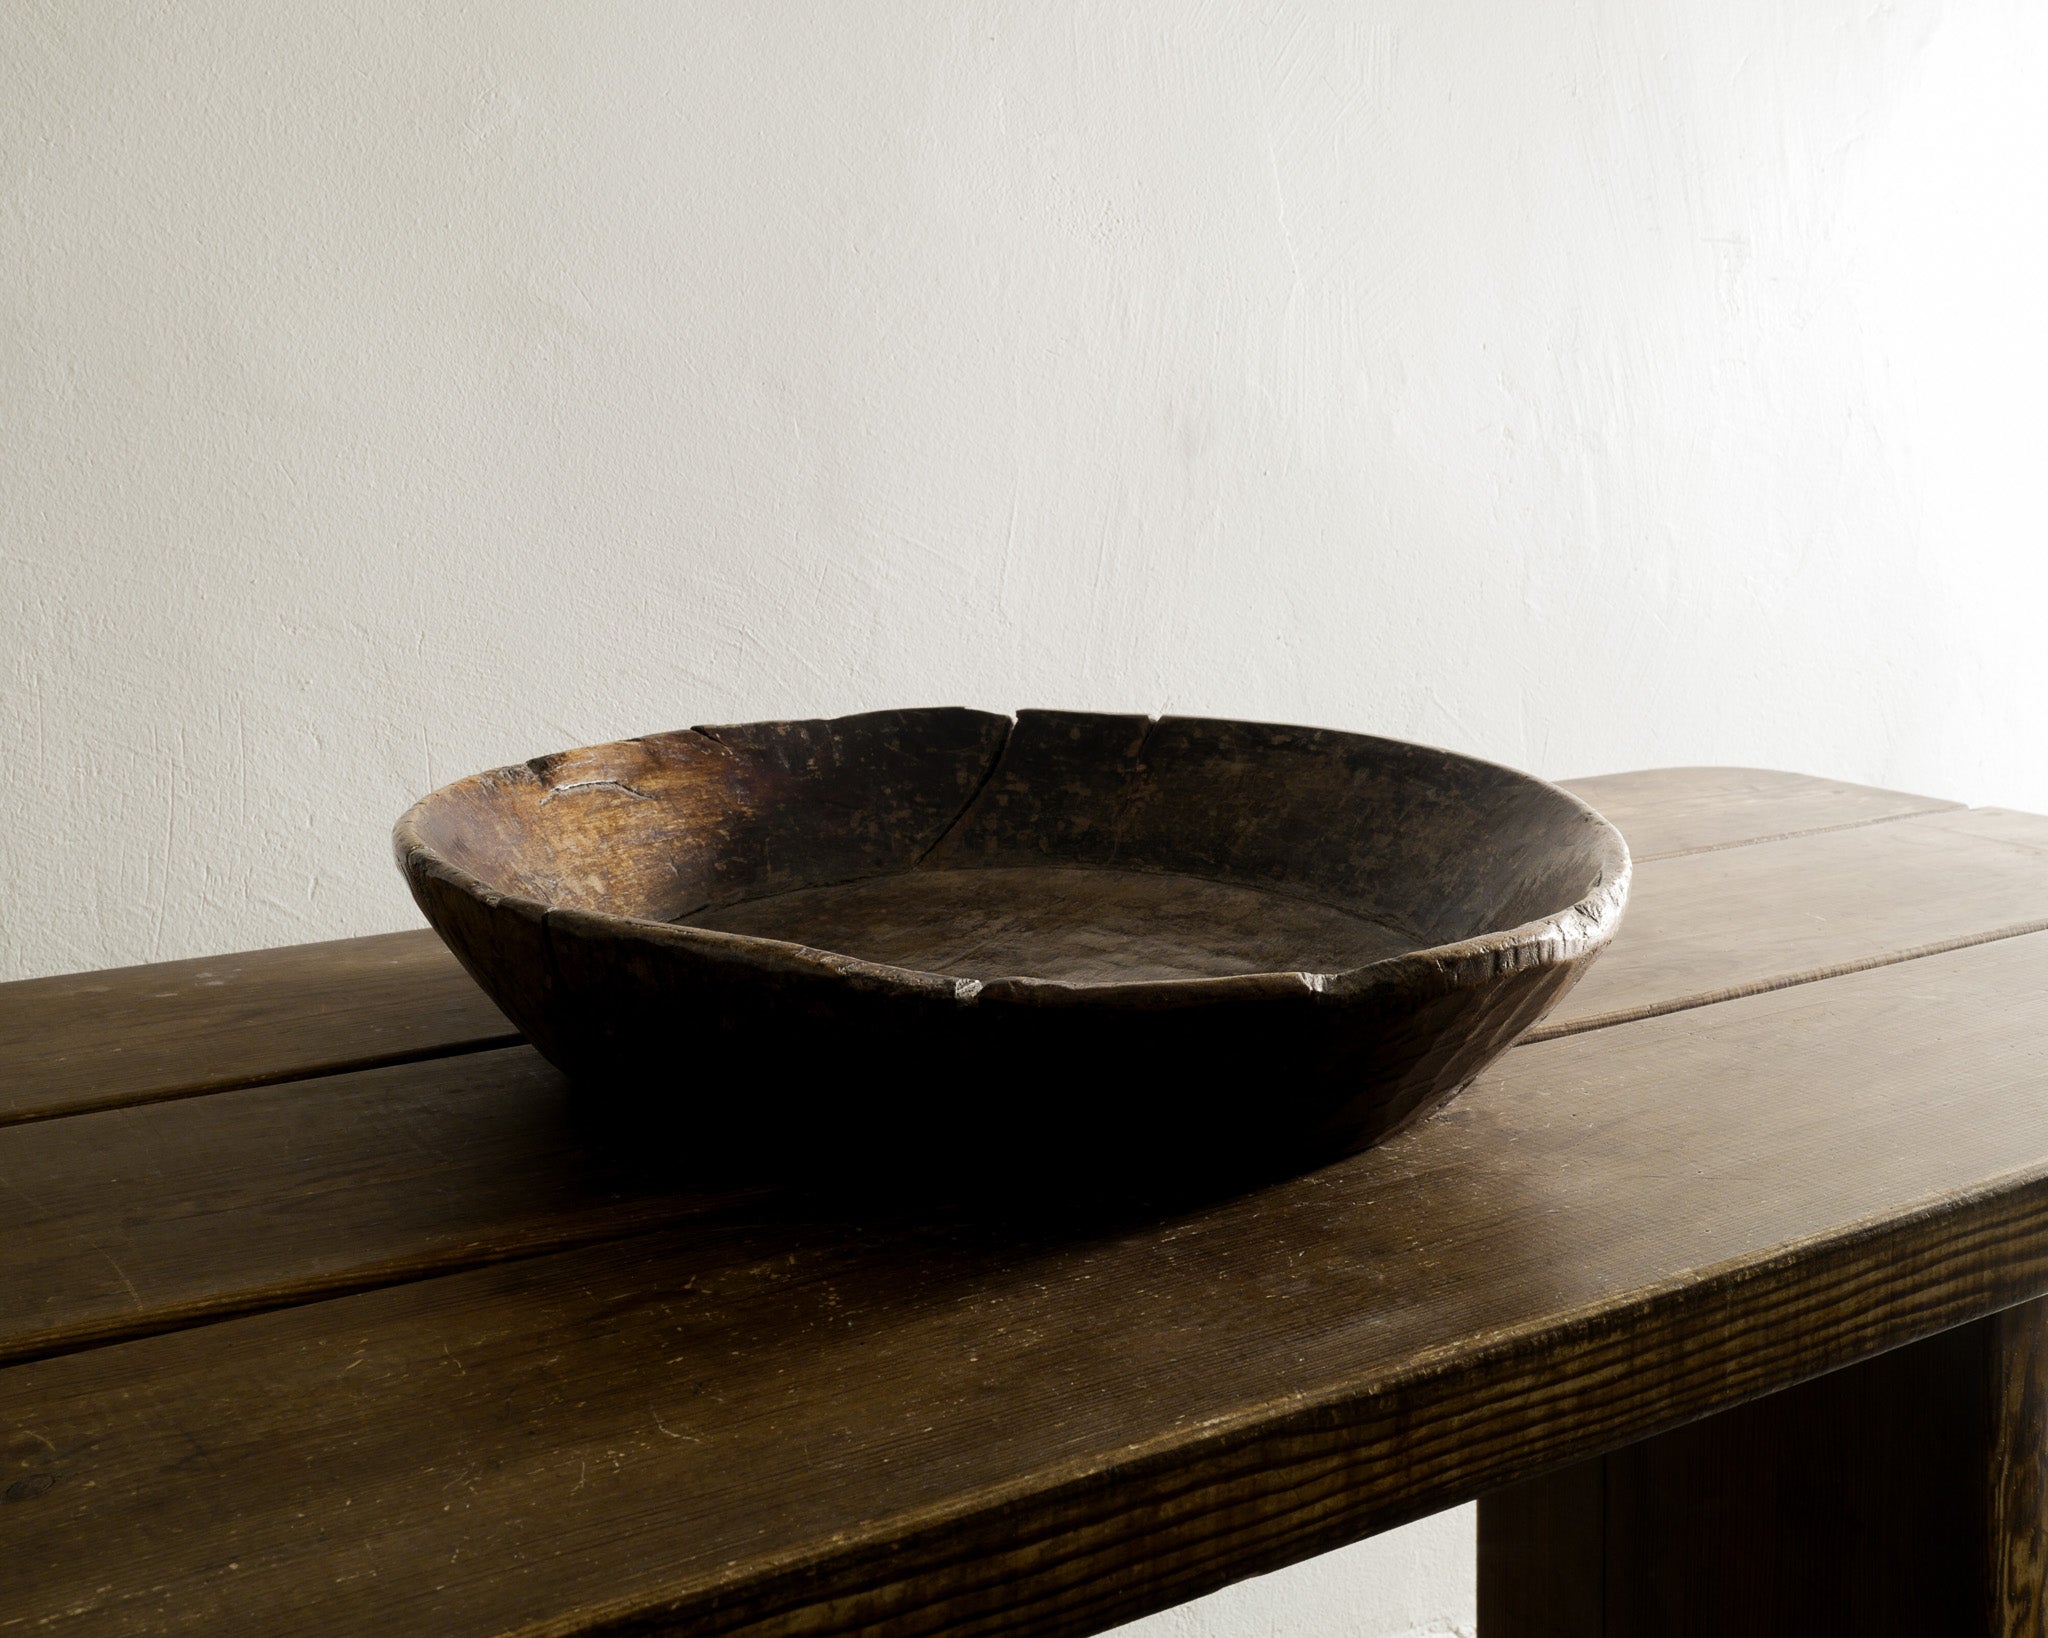 FRENCH OAK BOWL, EARLY 1800s